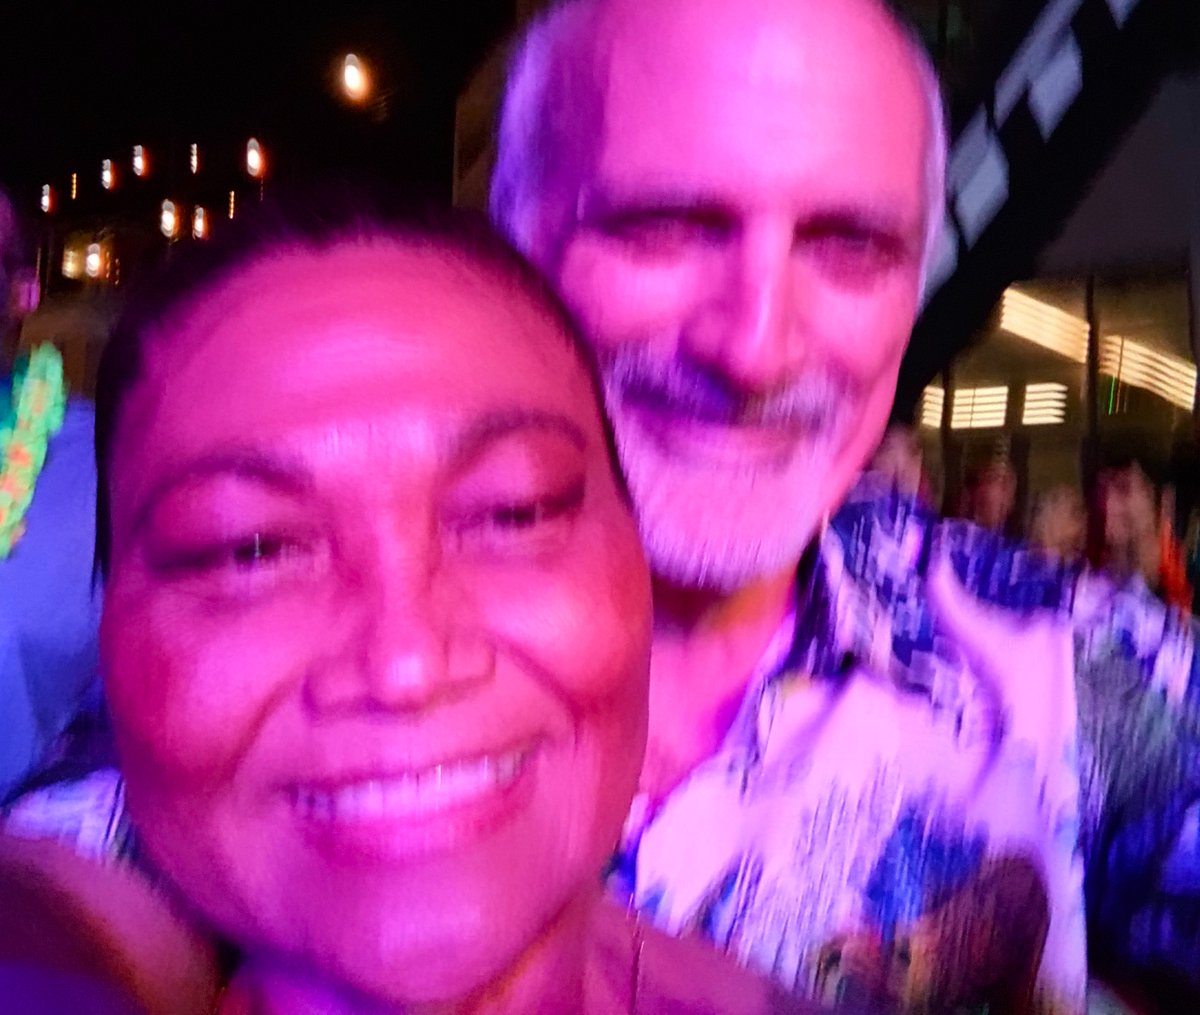 Favorite thing from Jeep Beach 2024 - Jeep Tiki Party last night, getting huggy with my wife, kissing her neck, & hearing the older lady behind us say 'awww - they must be newlyweds'
#jeepbeach2024 #Jeepbeachtikiparty #JeepLife #ilovemywife #ilovemywife❤️#judyscoconuthut